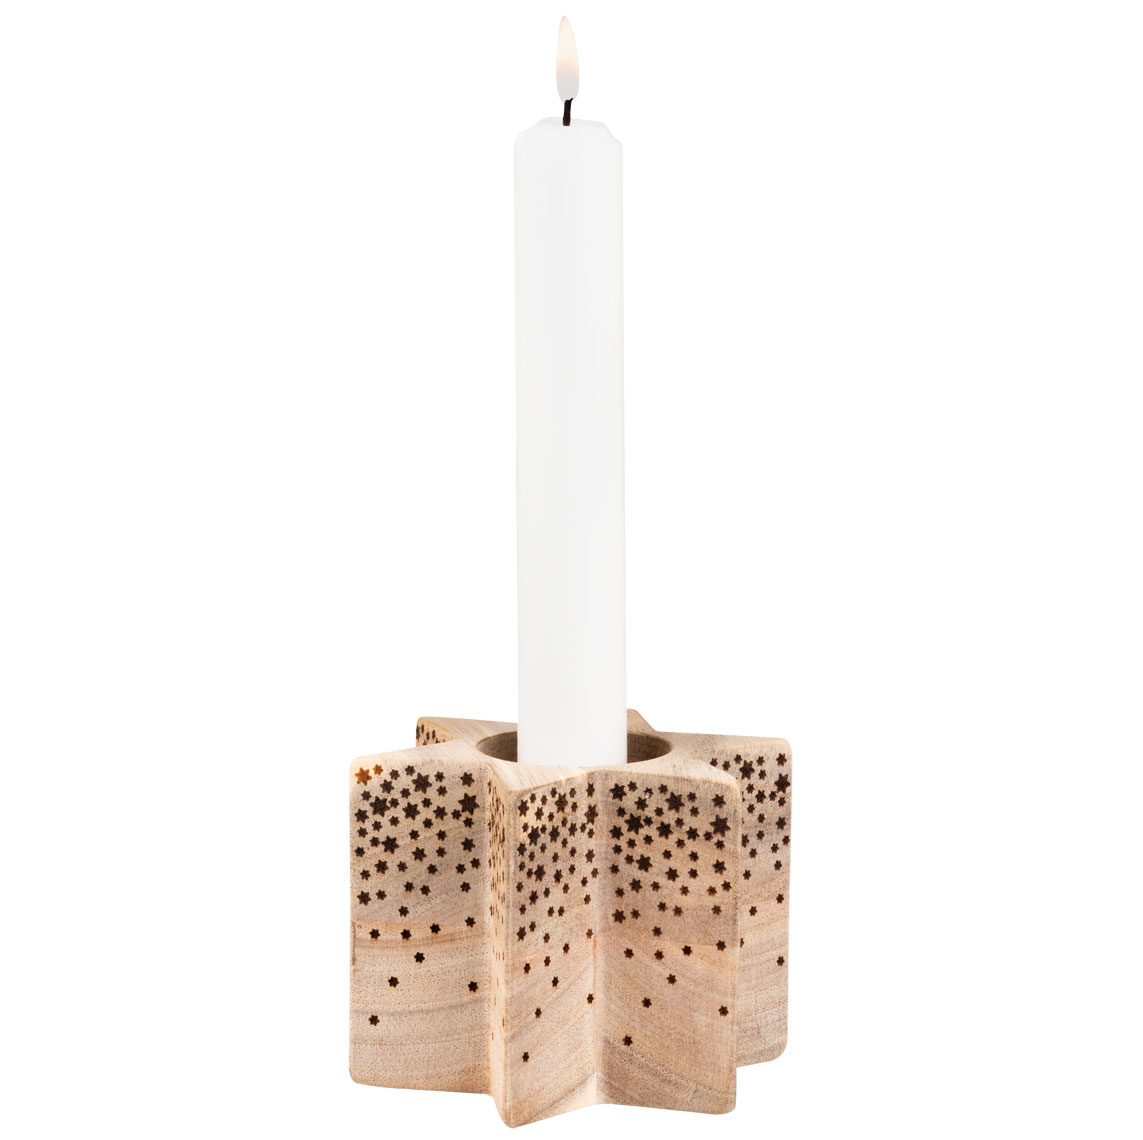 Räder Wooden Star Shaped Candle Holder with Star Engraving 